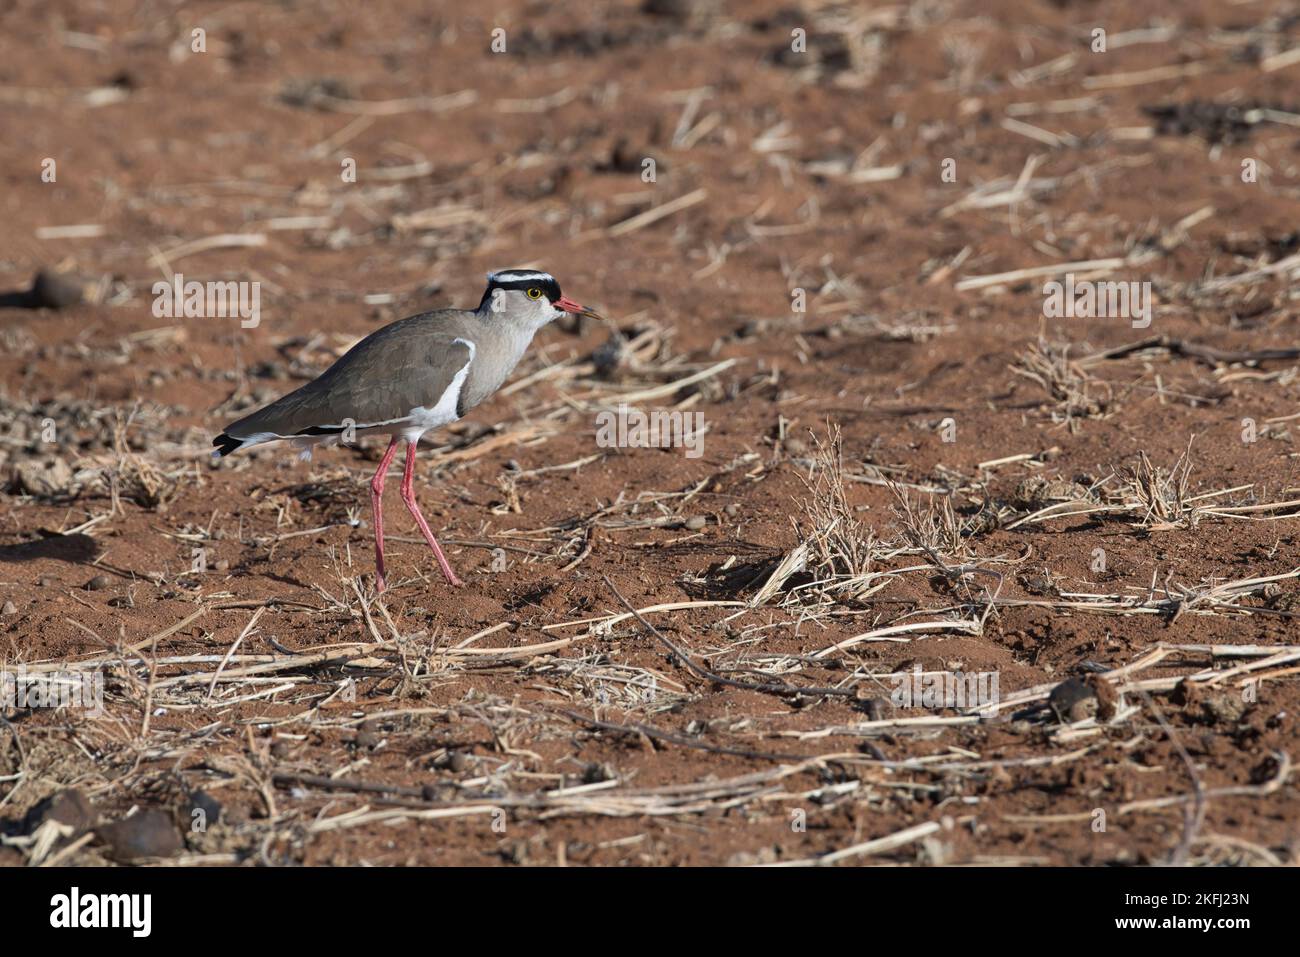 Crowned lapwing (Vanellus coronatus), also known as the crowned plover. Adult. Stock Photo